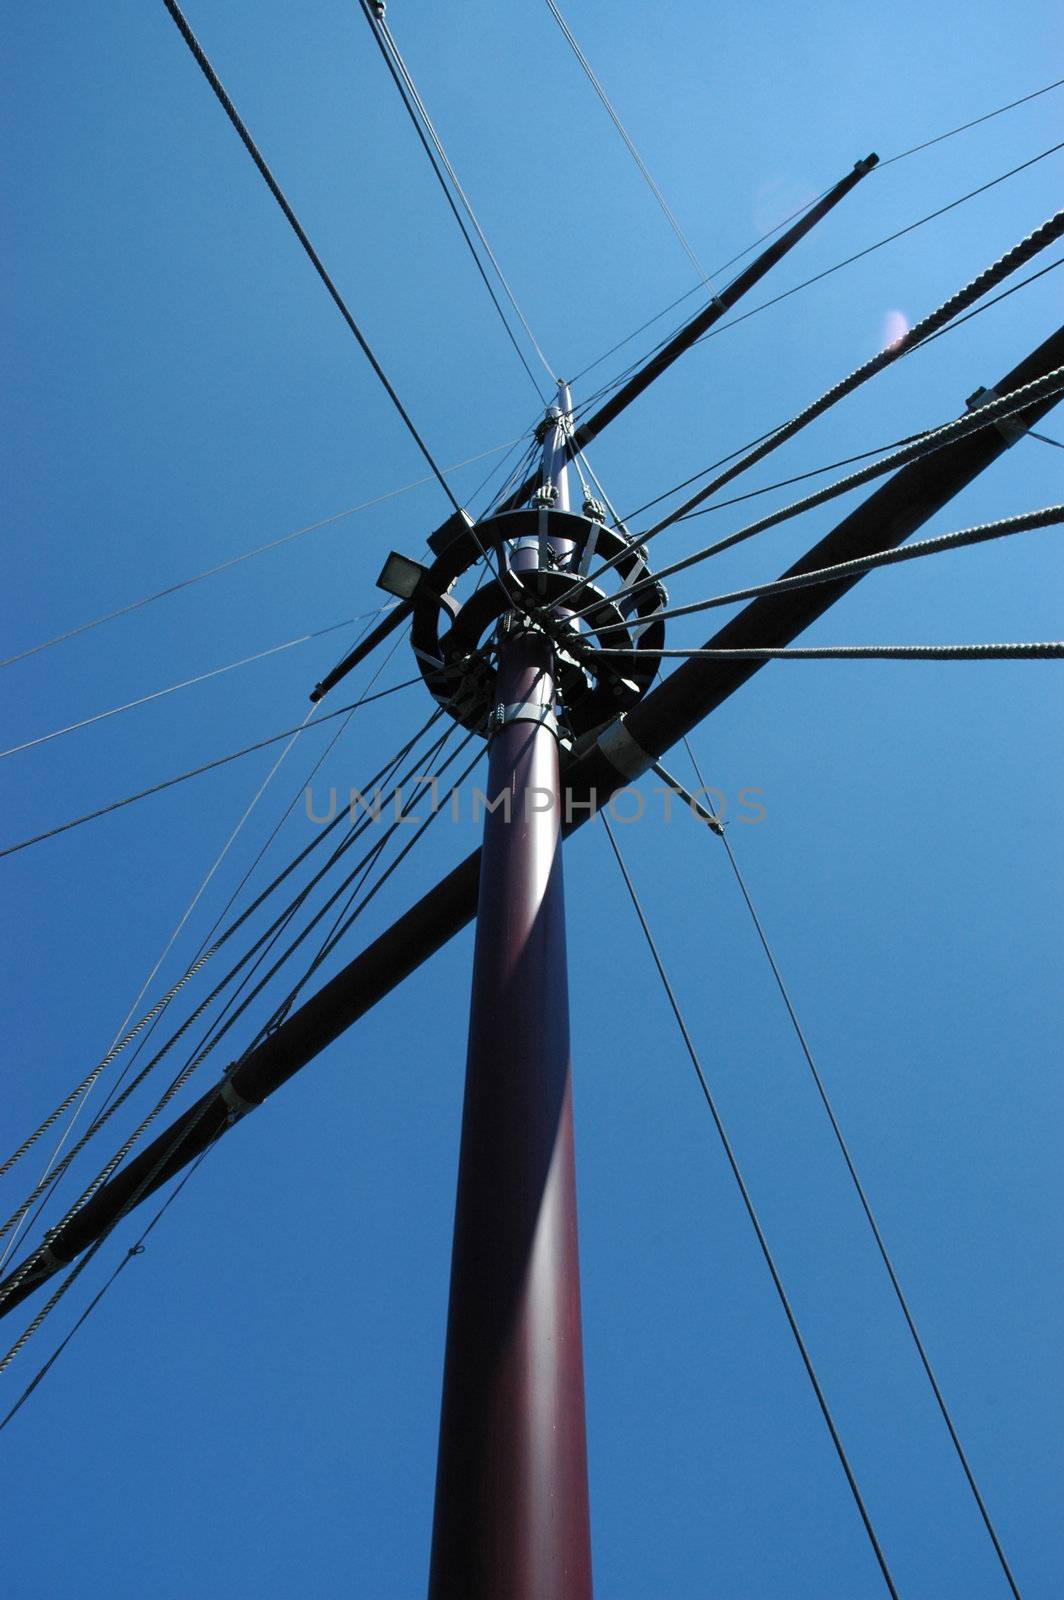 Old wooden ships Mast shot from below against bright blue sky